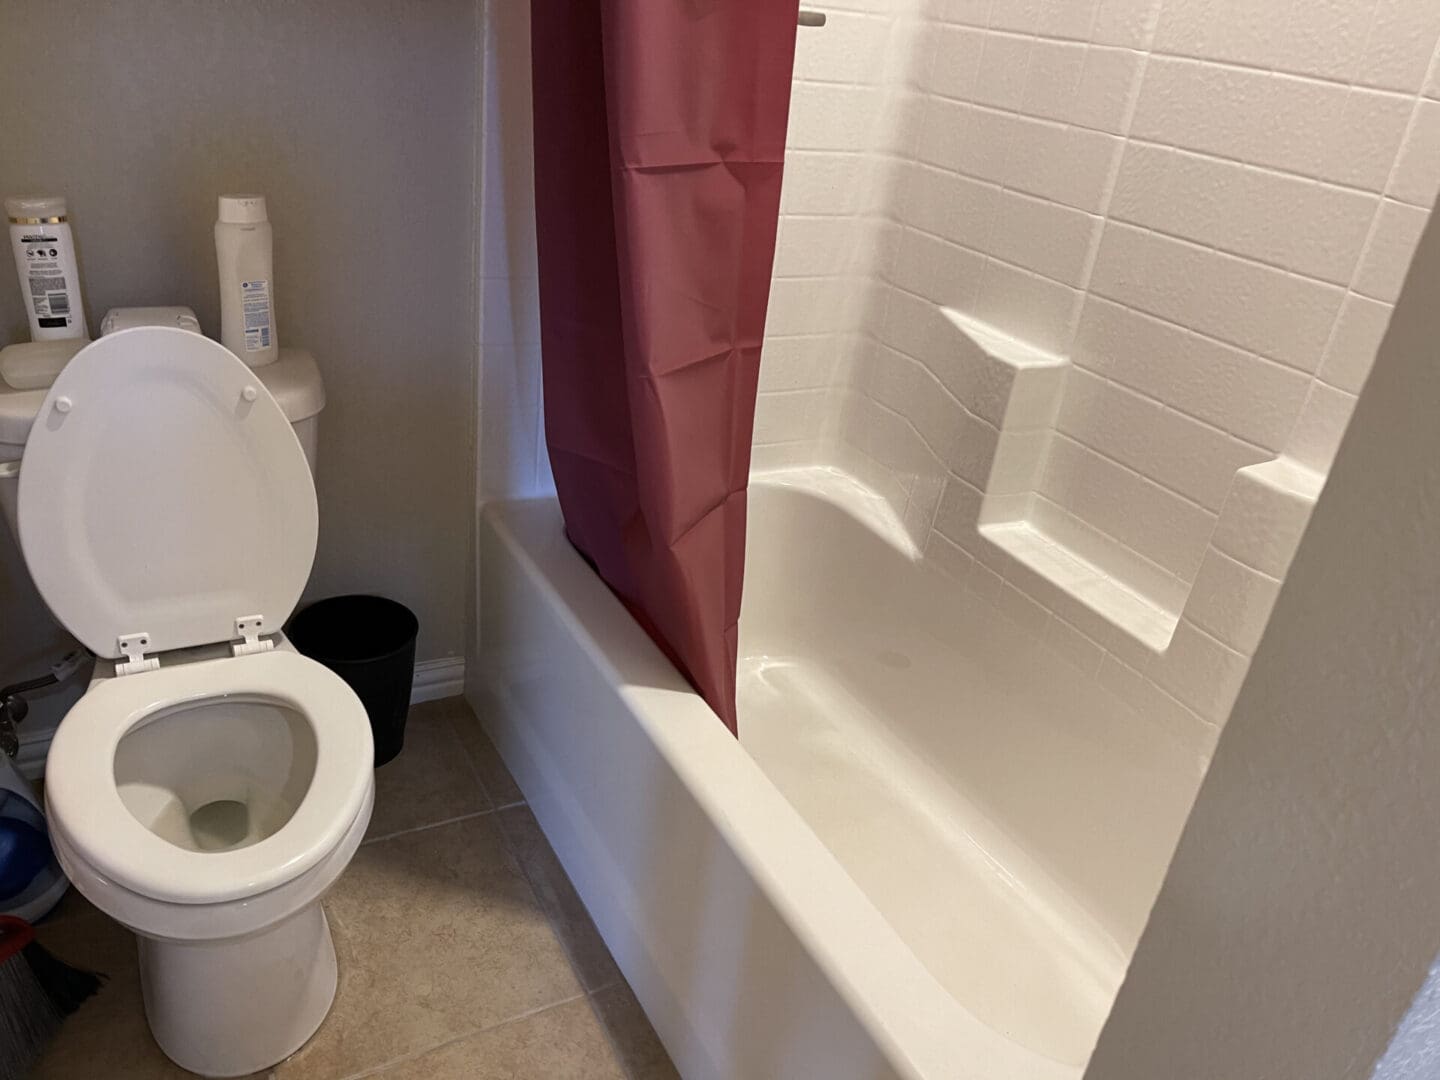 A bathroom with toilet, tub and shower.